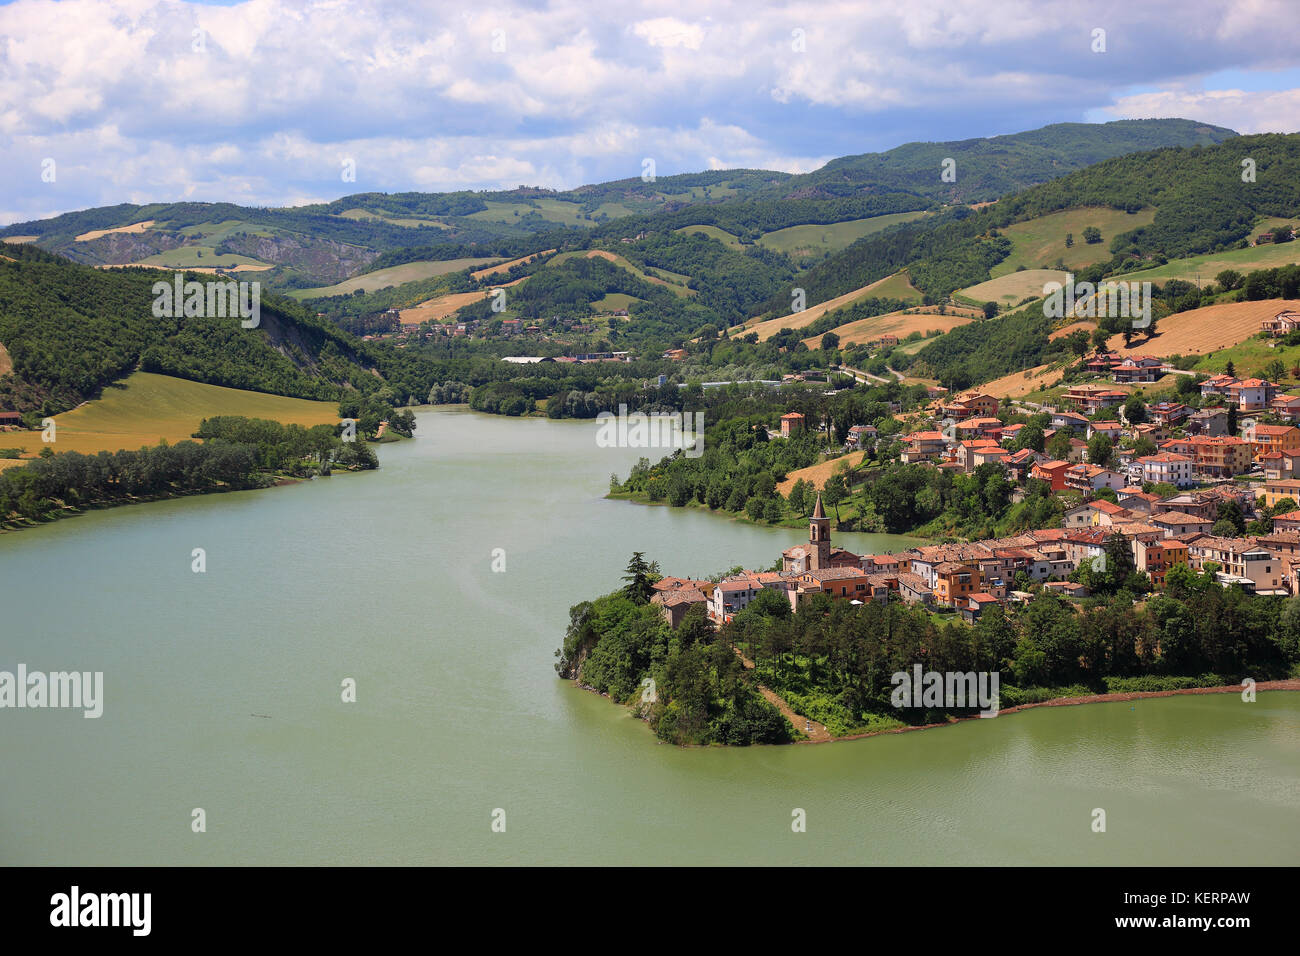 View from village of Sassocorvaro to Mercatale and lake Lago di Mercatale, Marche, Italy Stock Photo